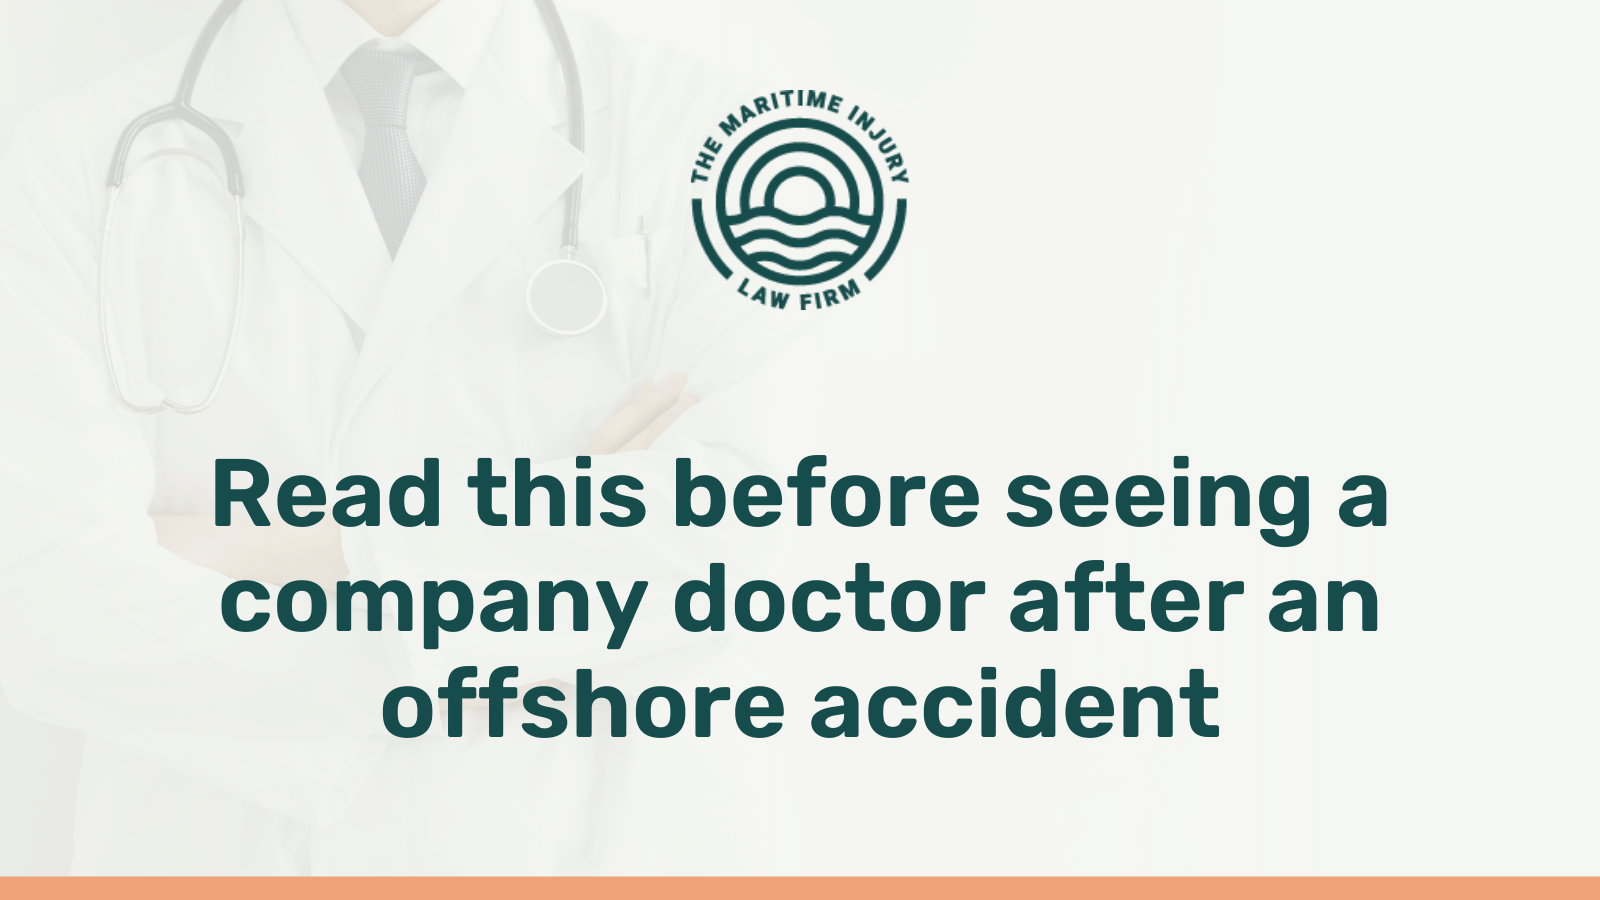 Read this before seeing a company doctor after an offshore accident - maritime injury law firm - George Vourvoulias